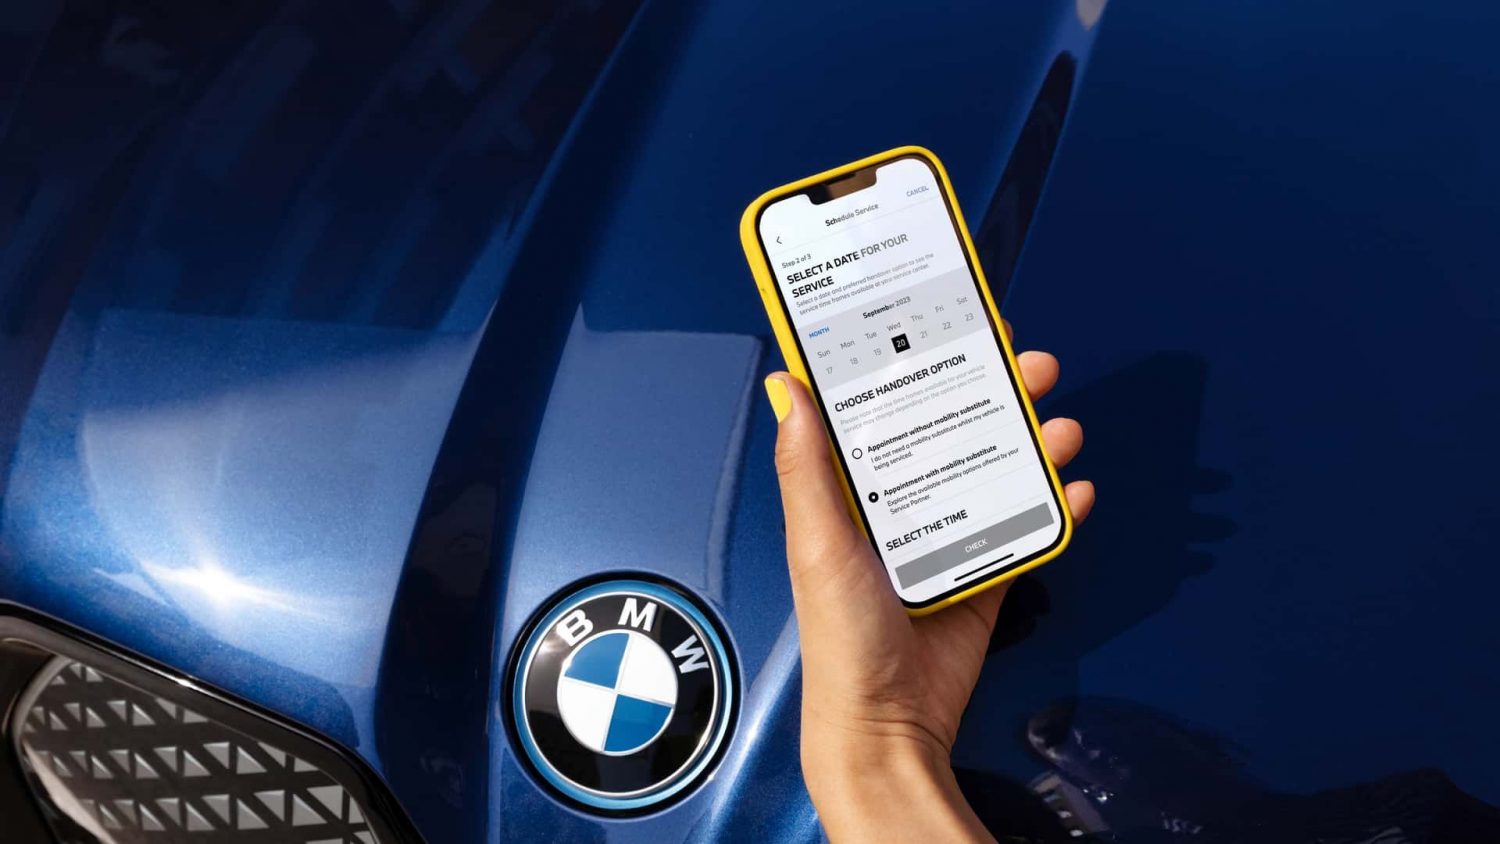 BMW has now discovered yet another method to use the new technology - Proactive Care, blends data and AI to advance customer service.